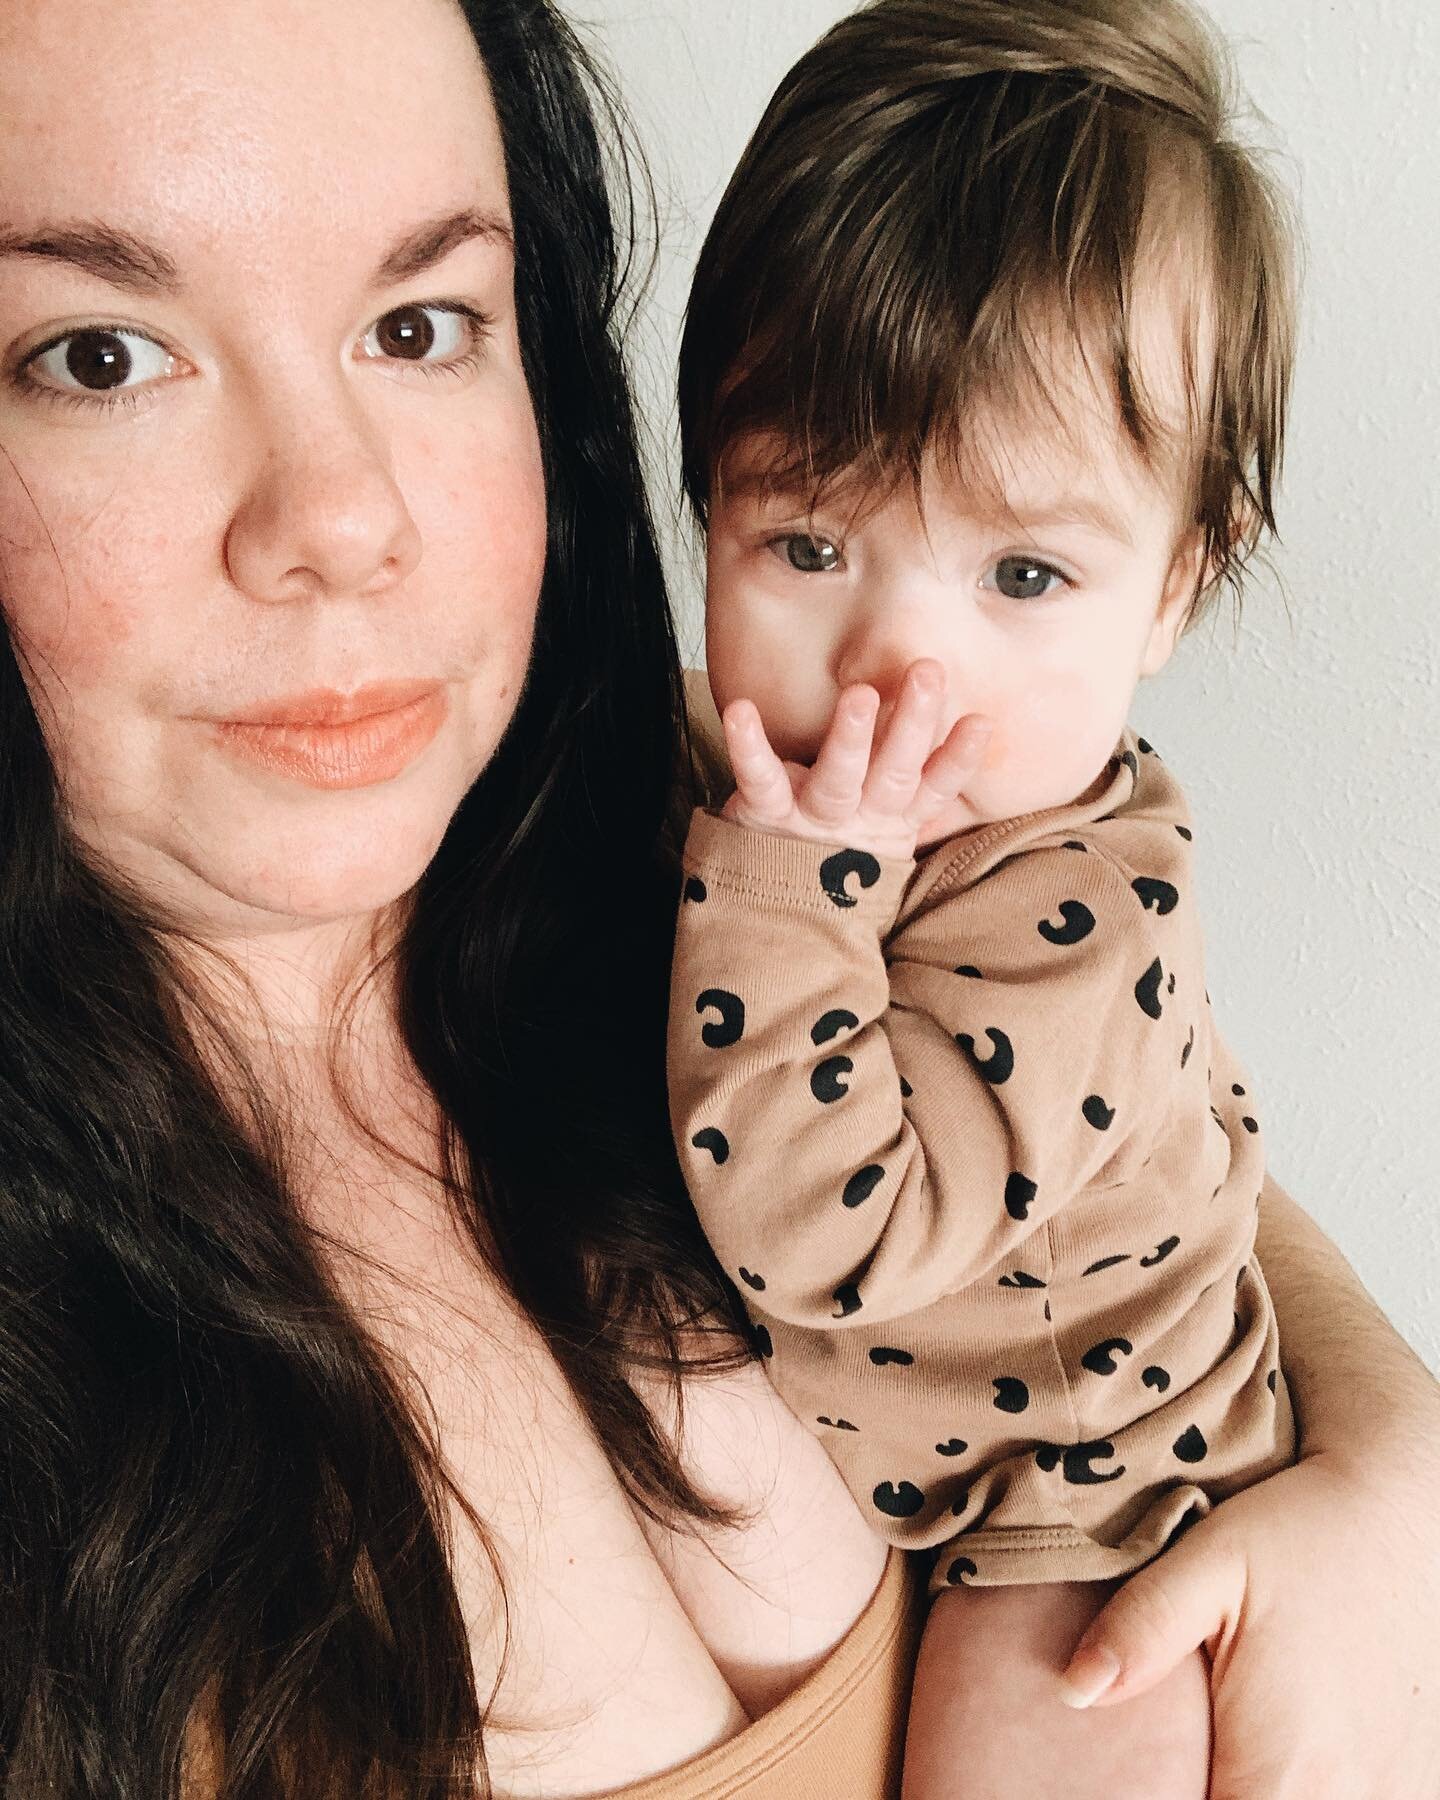 we took these during our snow week and i forgot to share. my little buddy better get used to the selfies with mama 😜 maybe this is why he prefers russell? he&rsquo;s been crying every time russell leaves the room lately, even though i&rsquo;m sittin